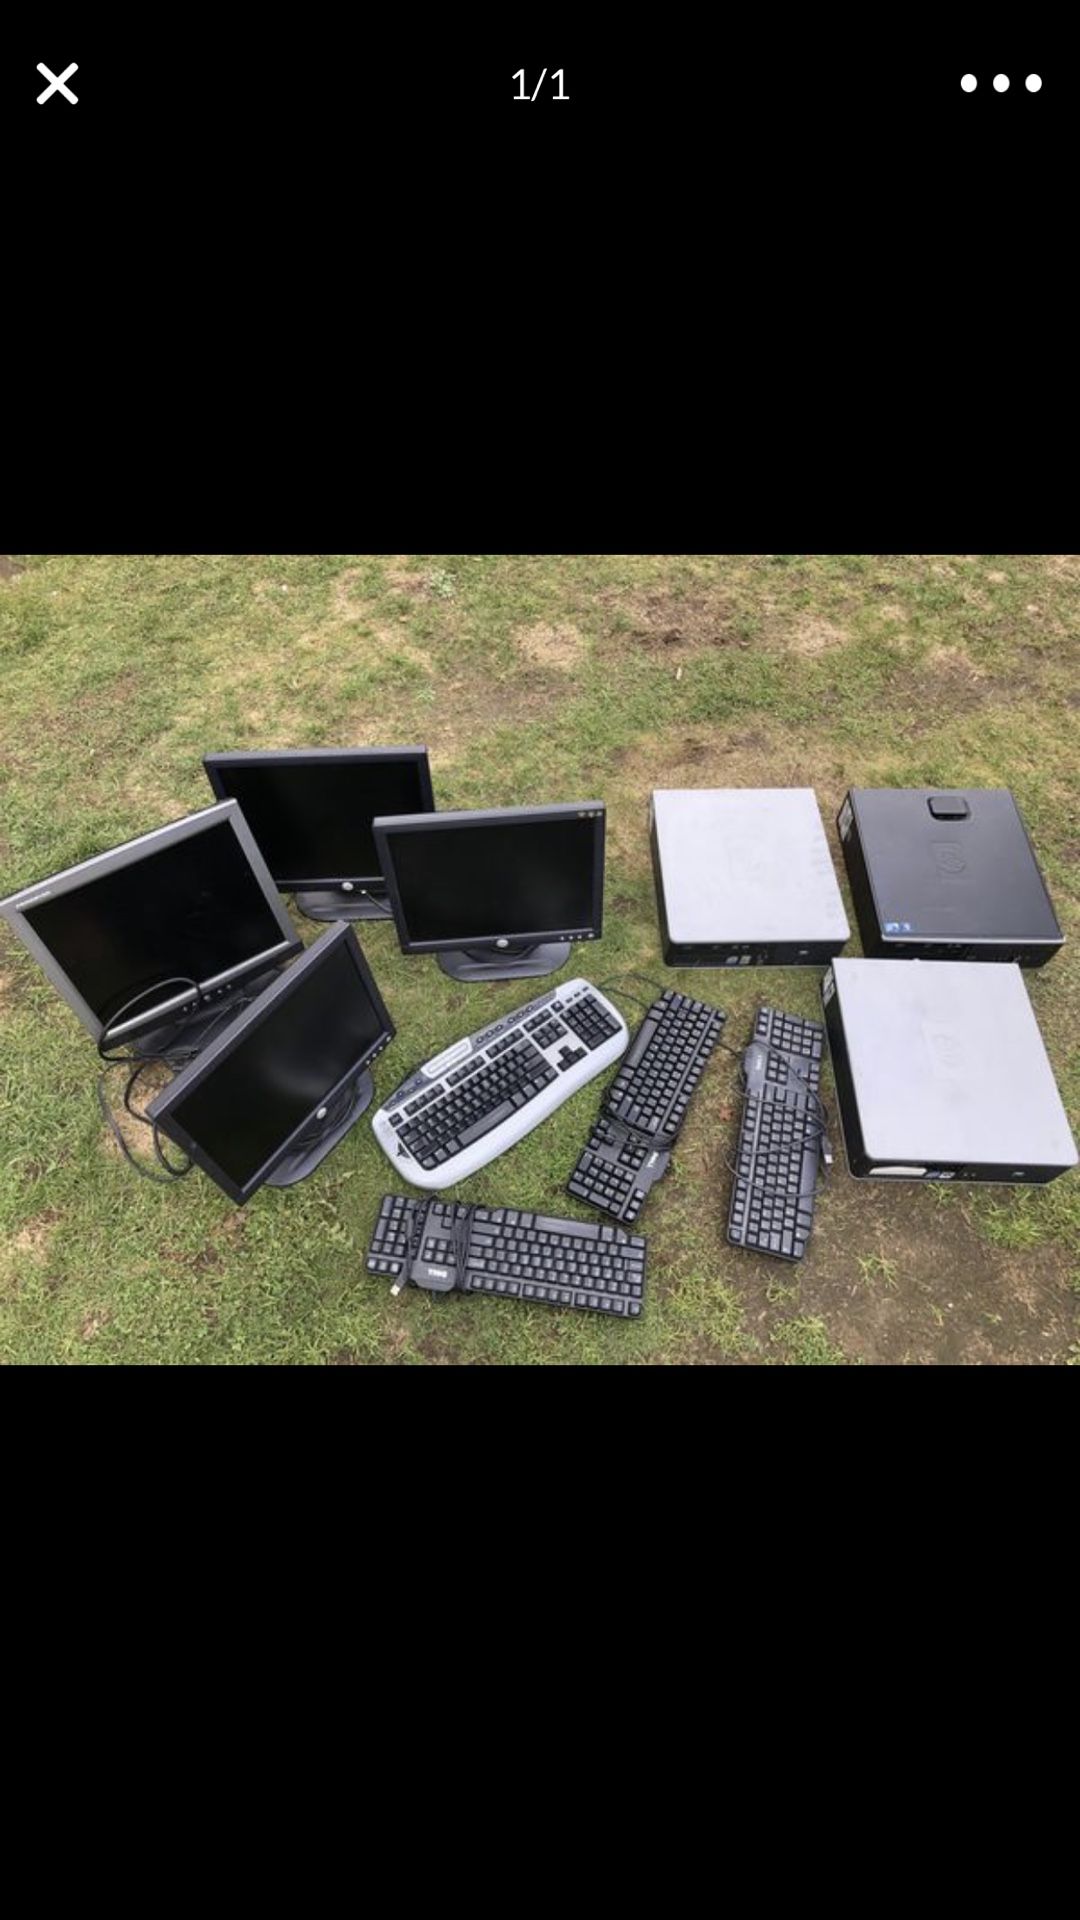 Computers with keyboards